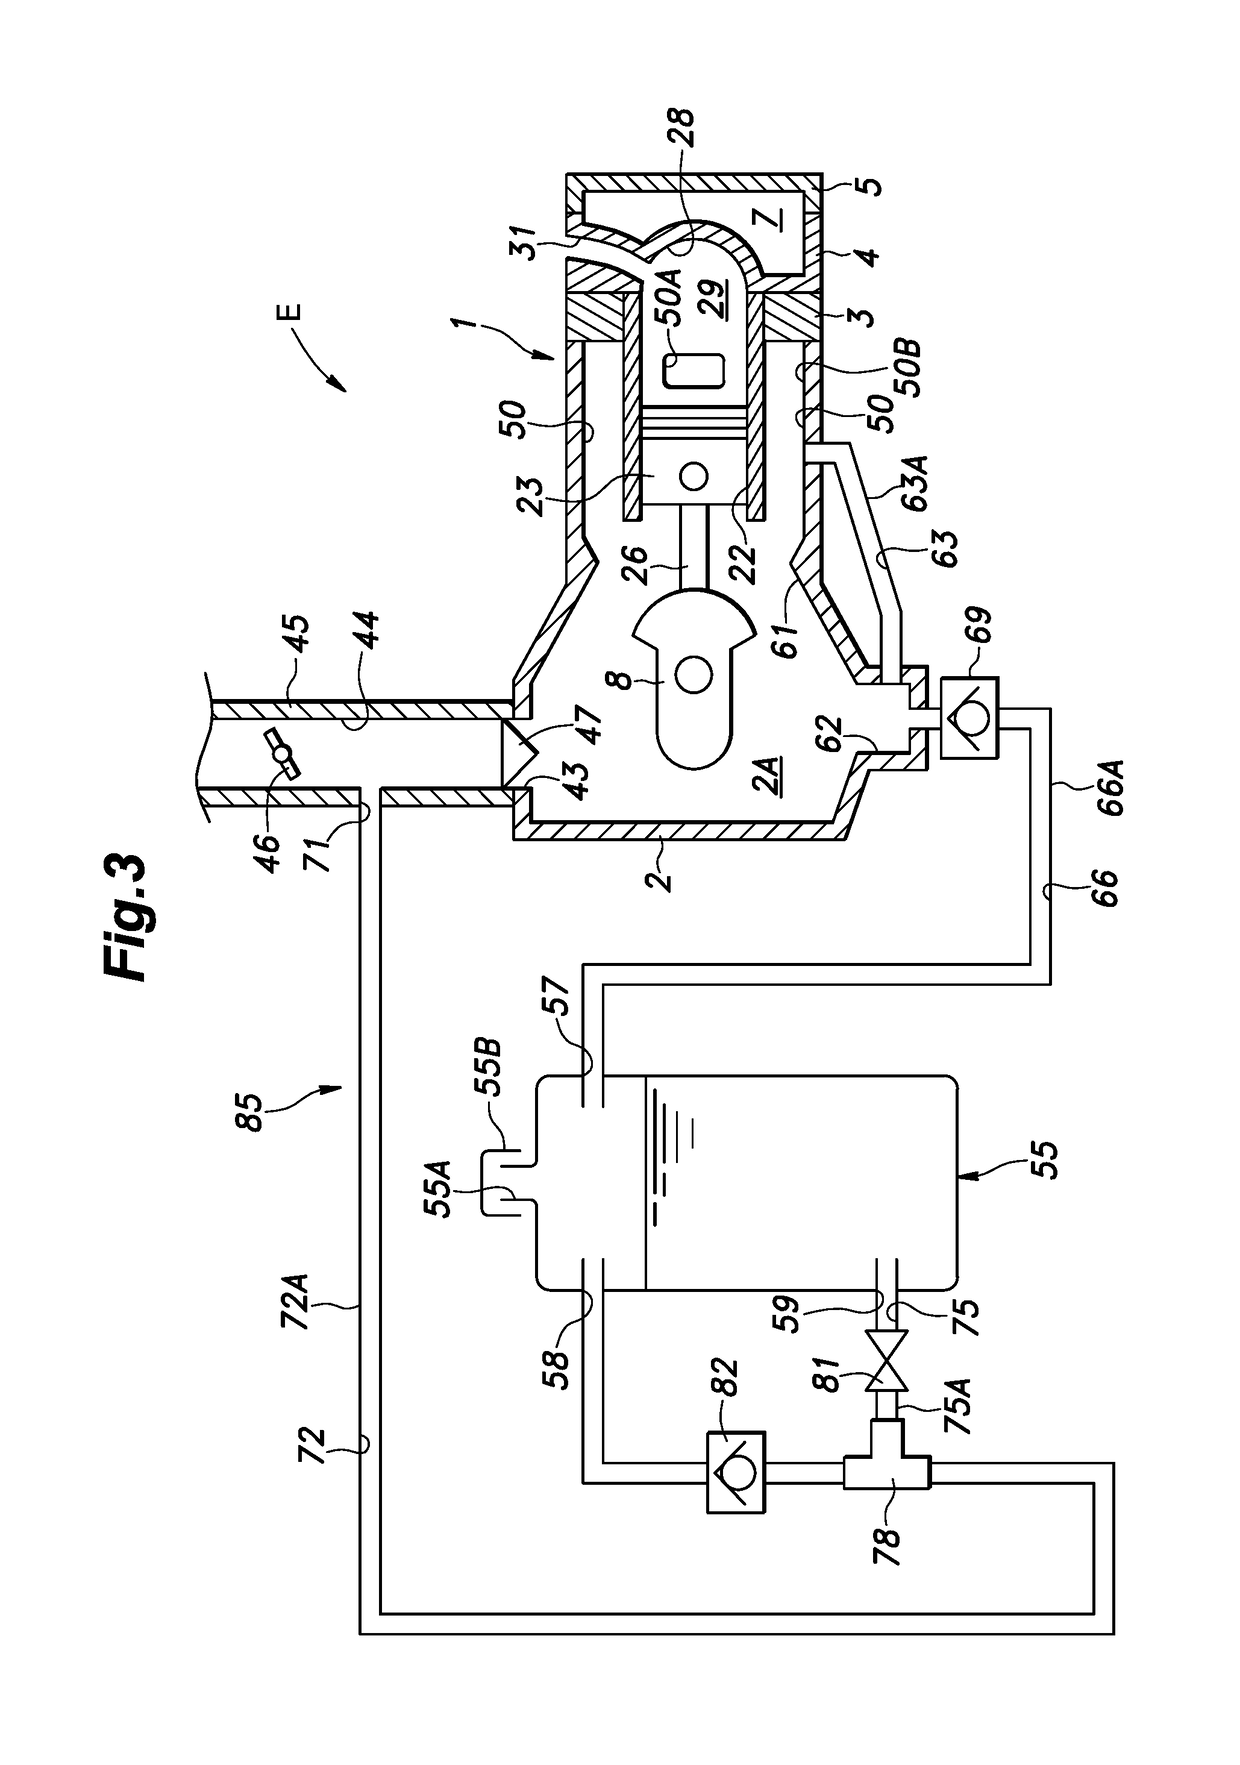 Lubrication system for internal combustion engine